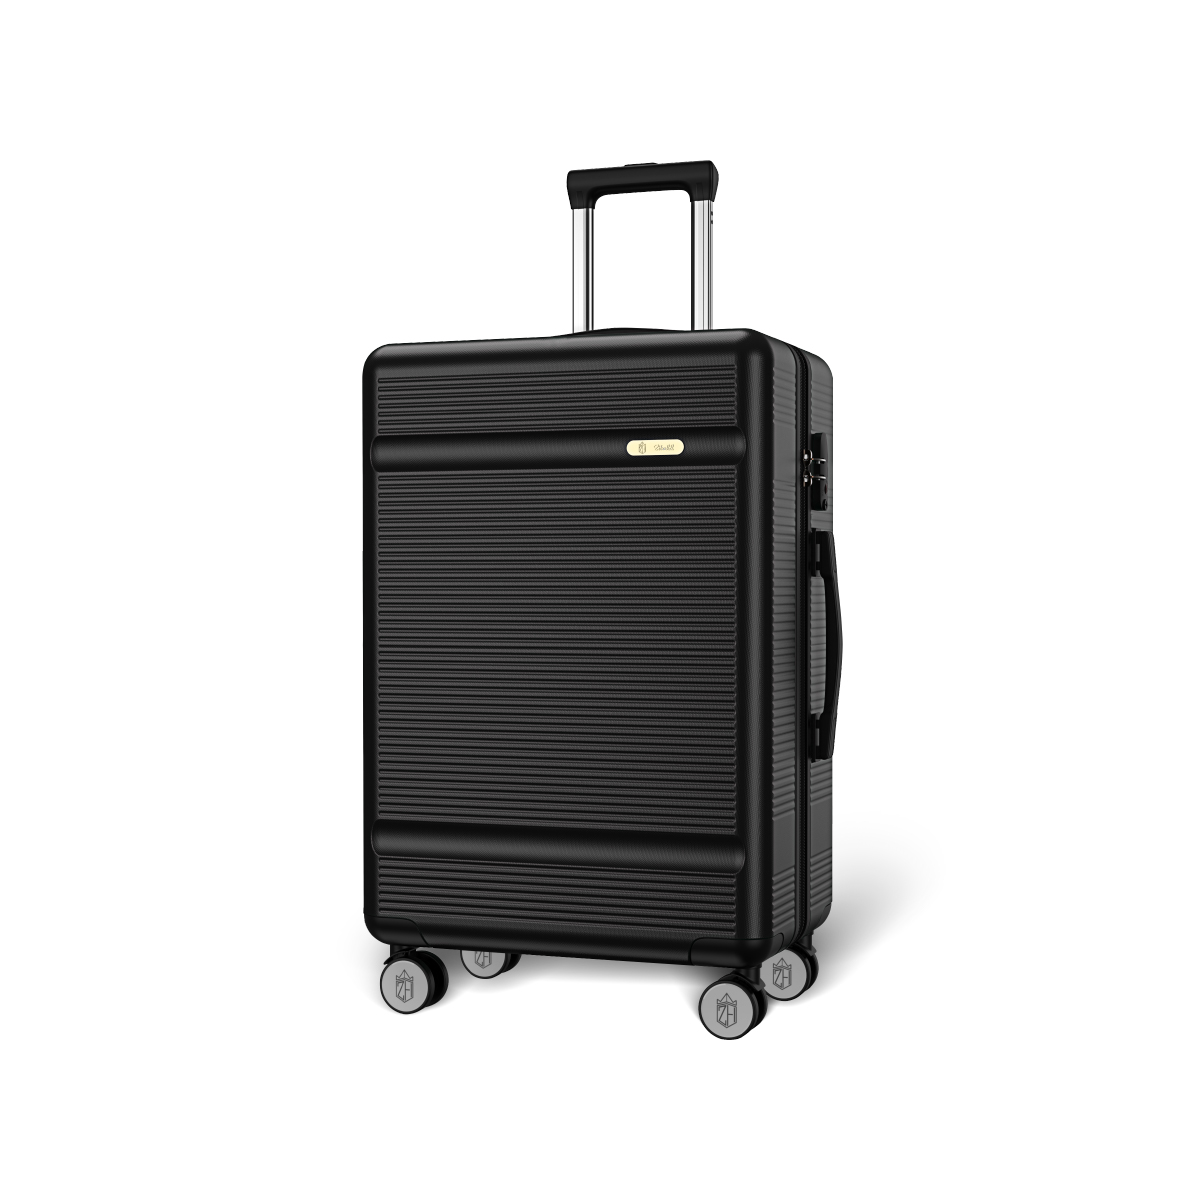 TrekMate Luggage 28 Inch